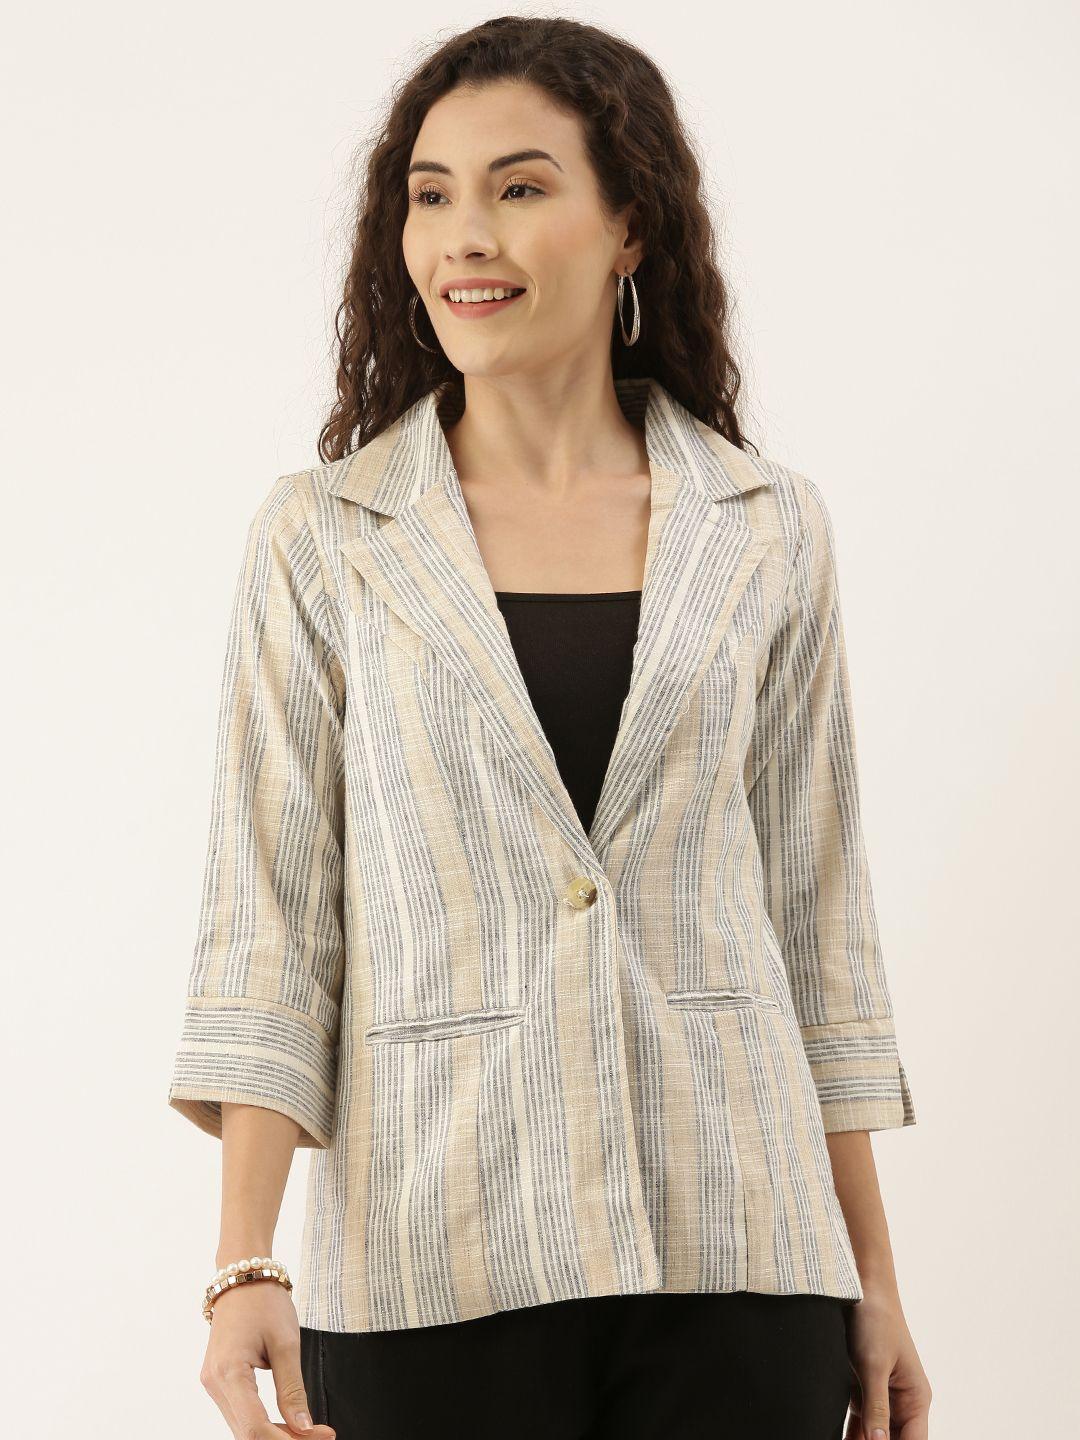 and-women-cream-coloured-striped-tailored-jacket